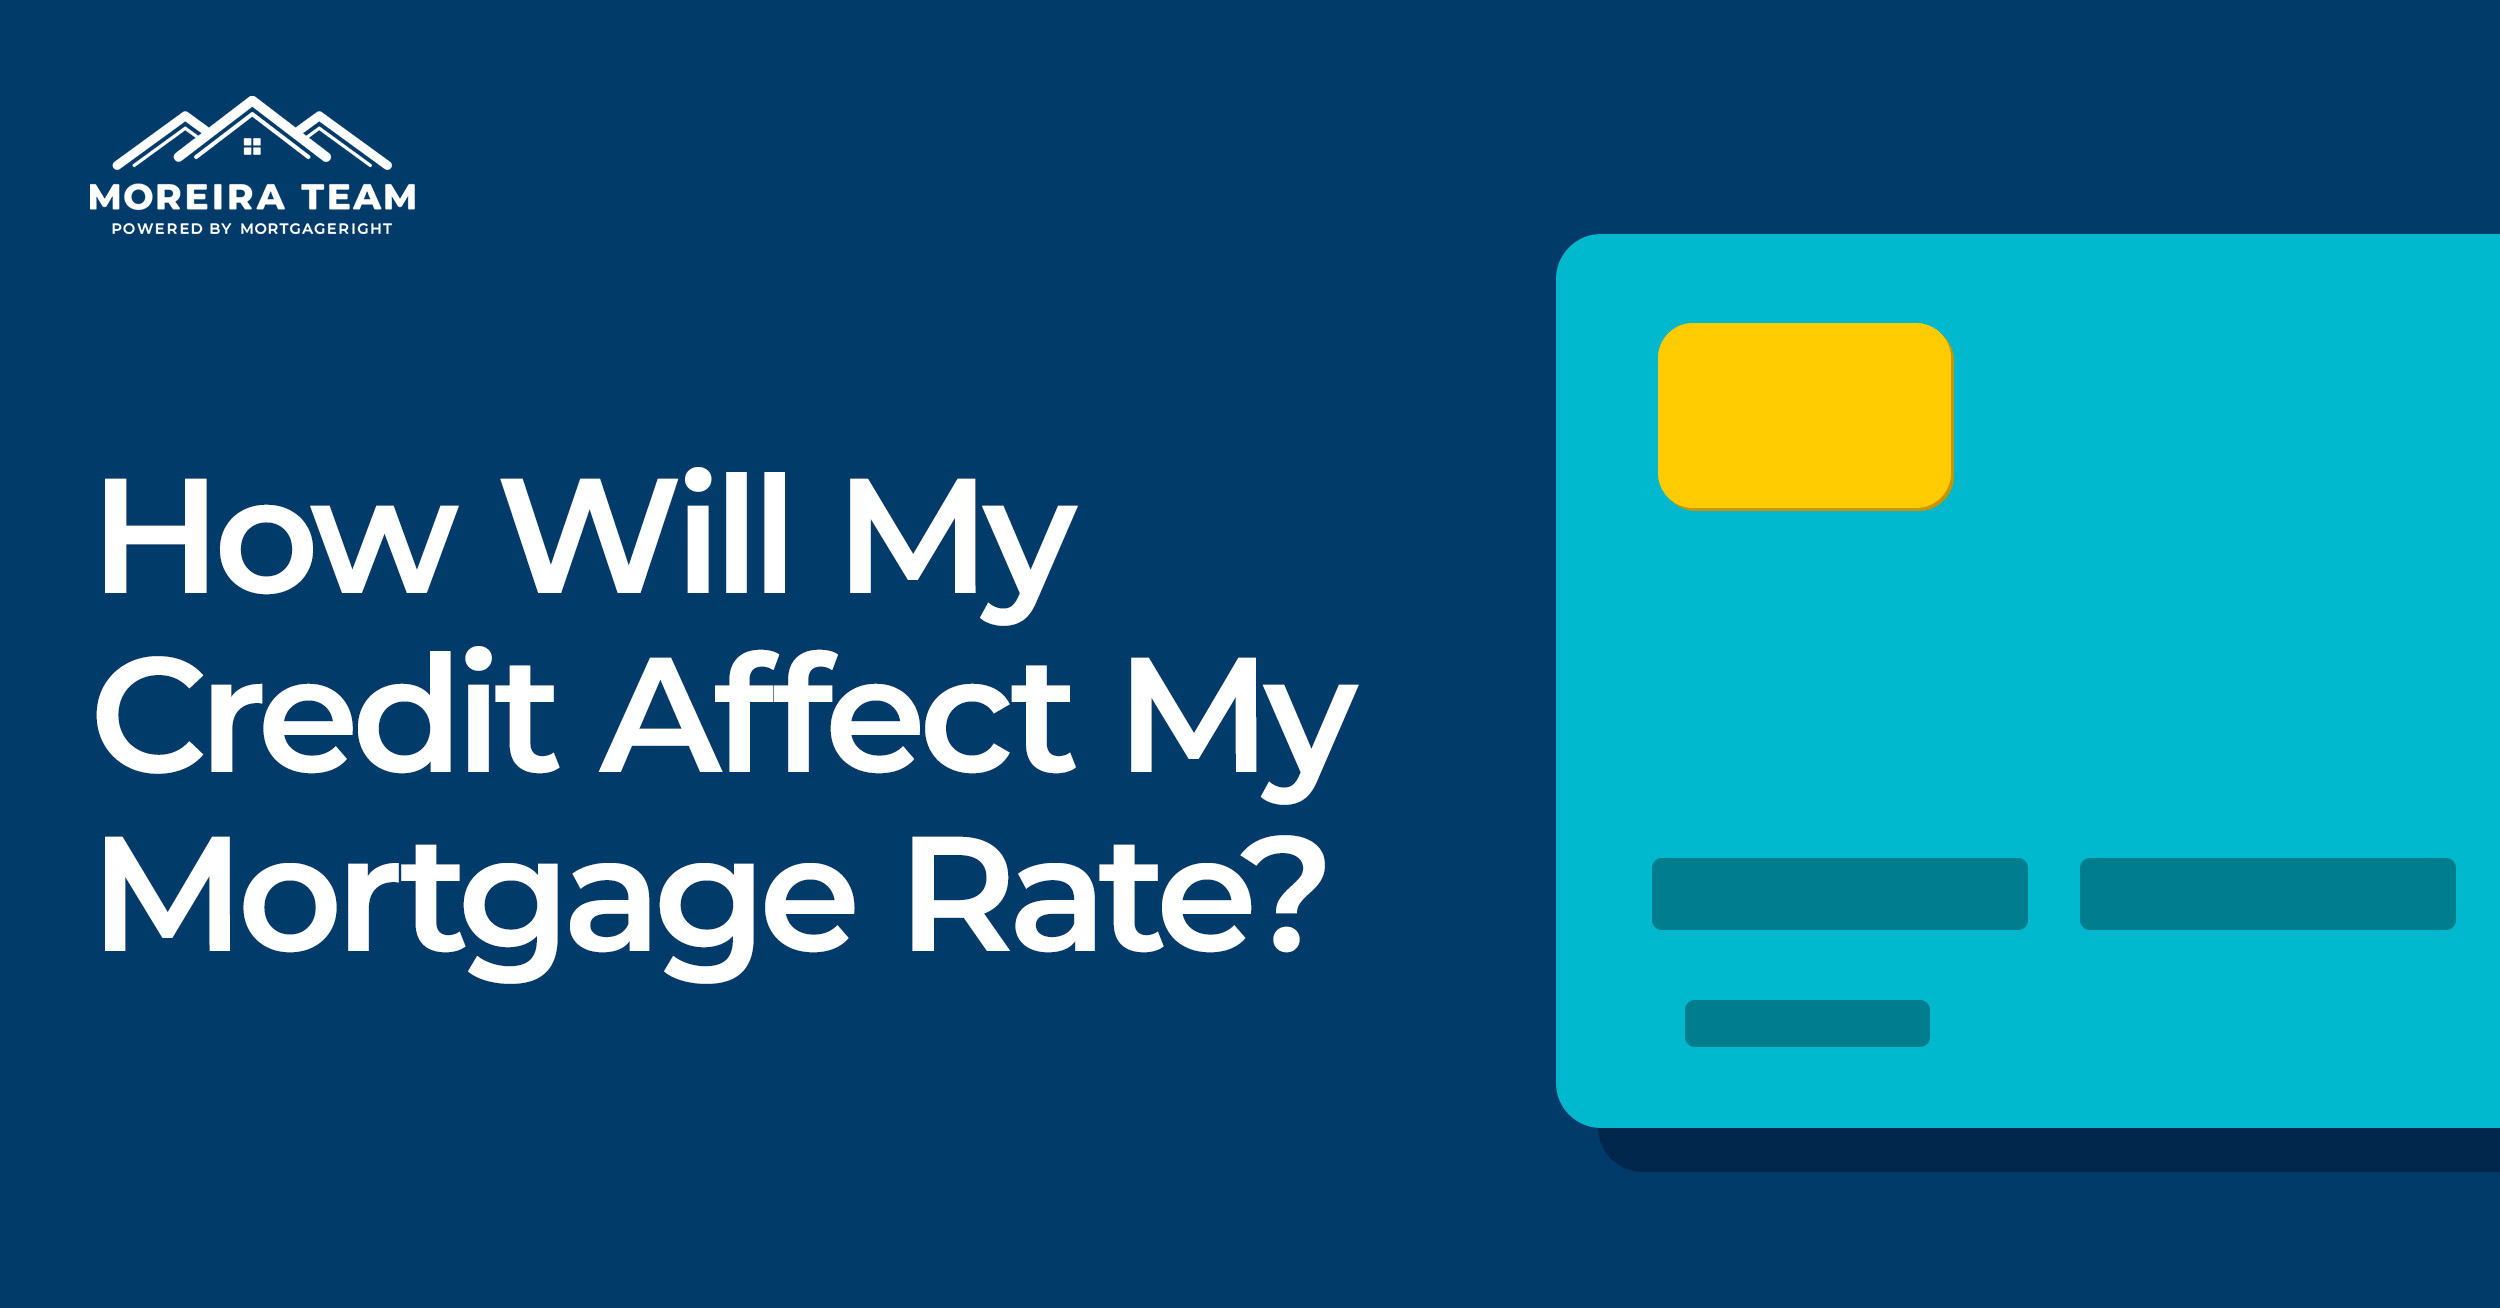 How Will My Credit Affect My Mortgage Rate?